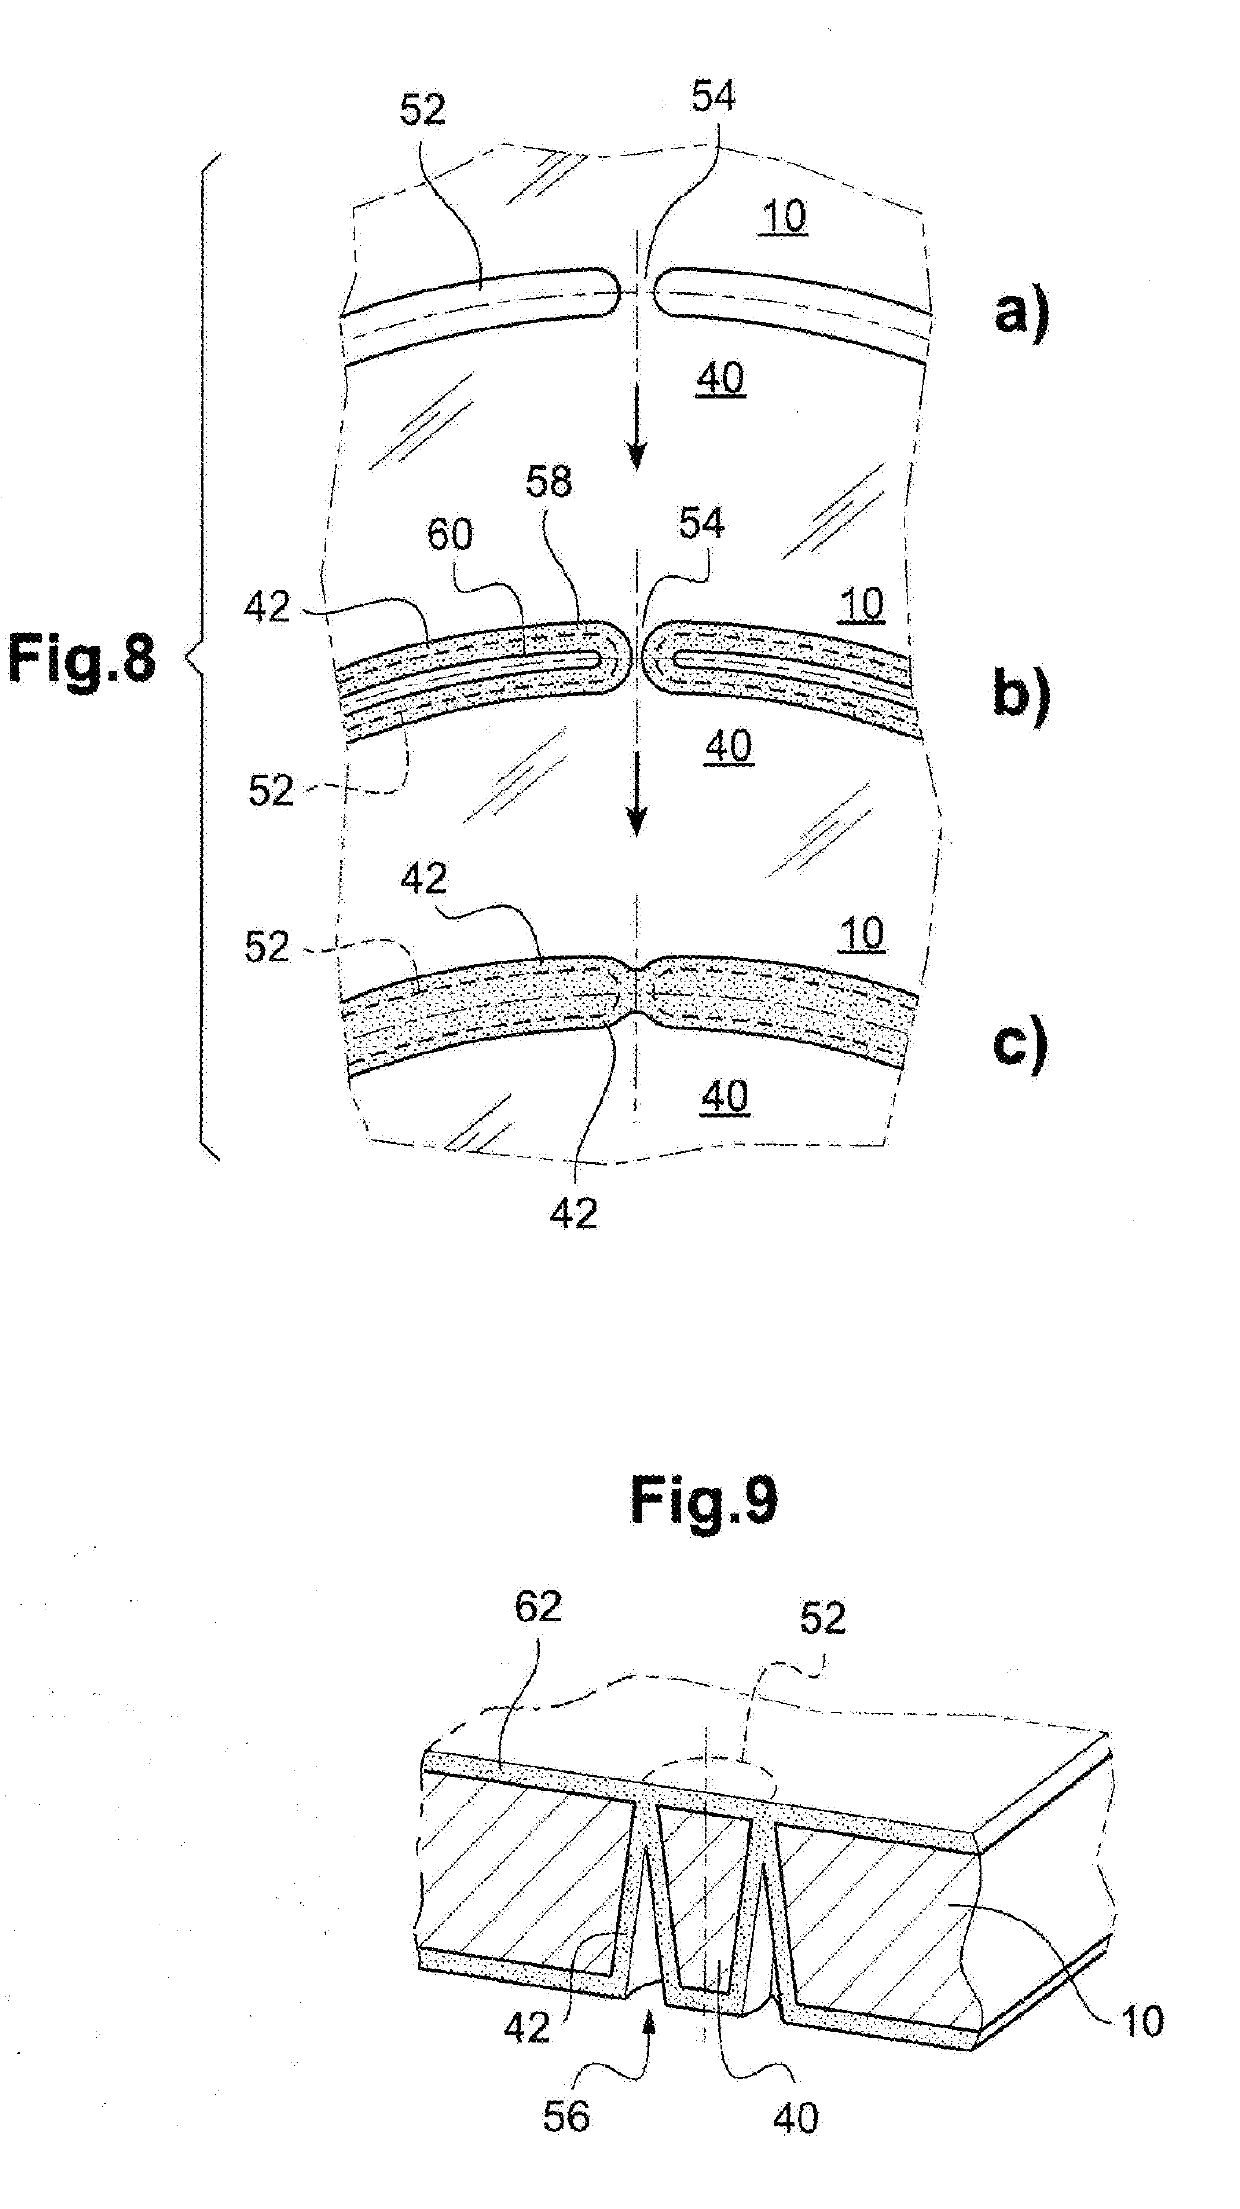 Methods of manufacturing a hermetic and isolating feedthrough for an electronic device casing, in particular made of titanium